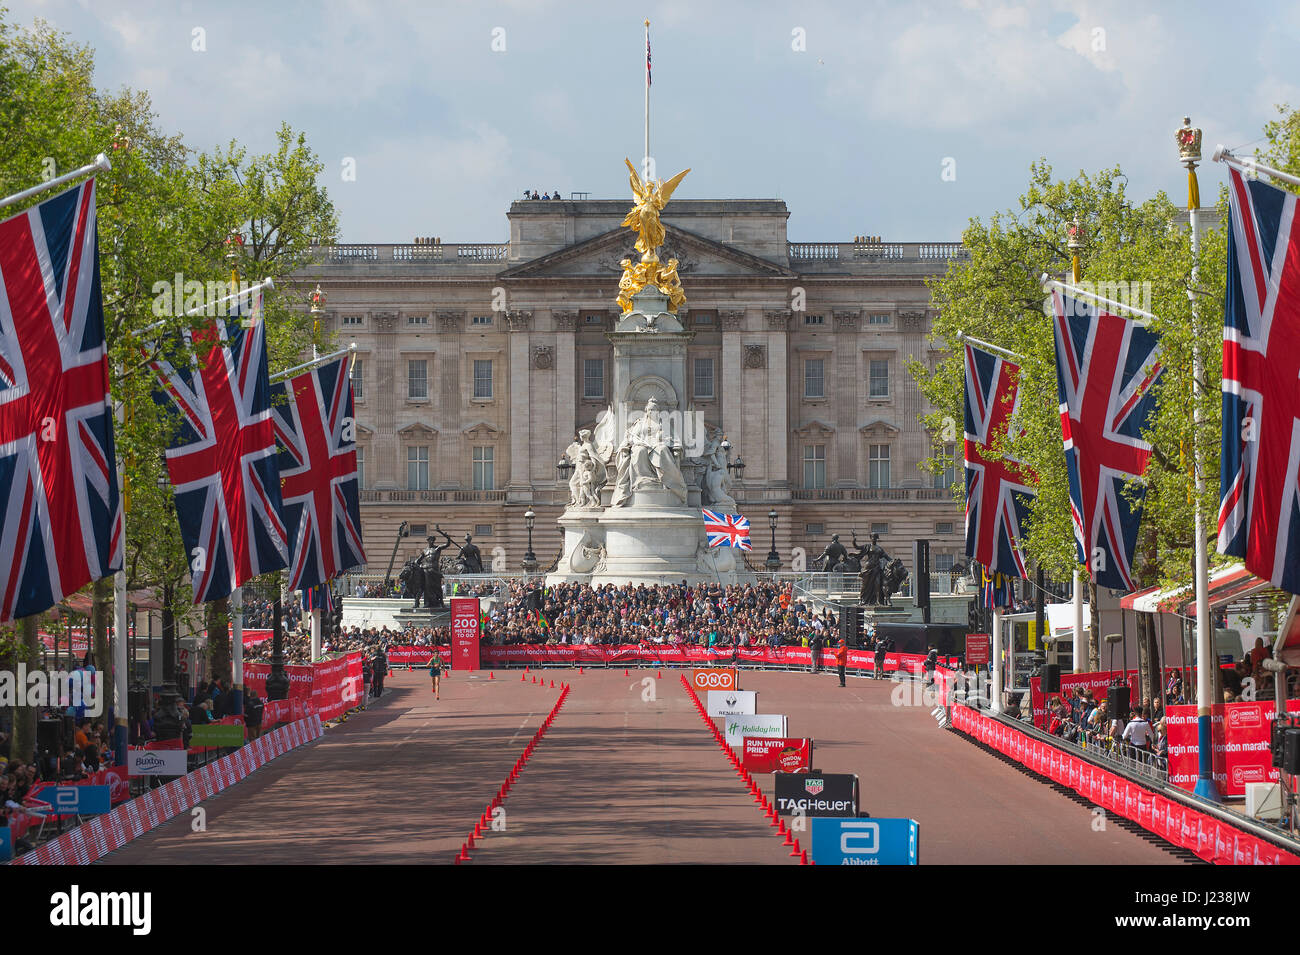 Buckingham Palace from the finish line of the 2017 Virgin Money London Marathon in The Mall. Credit: Malcolm Park/Alamy Stock Photo